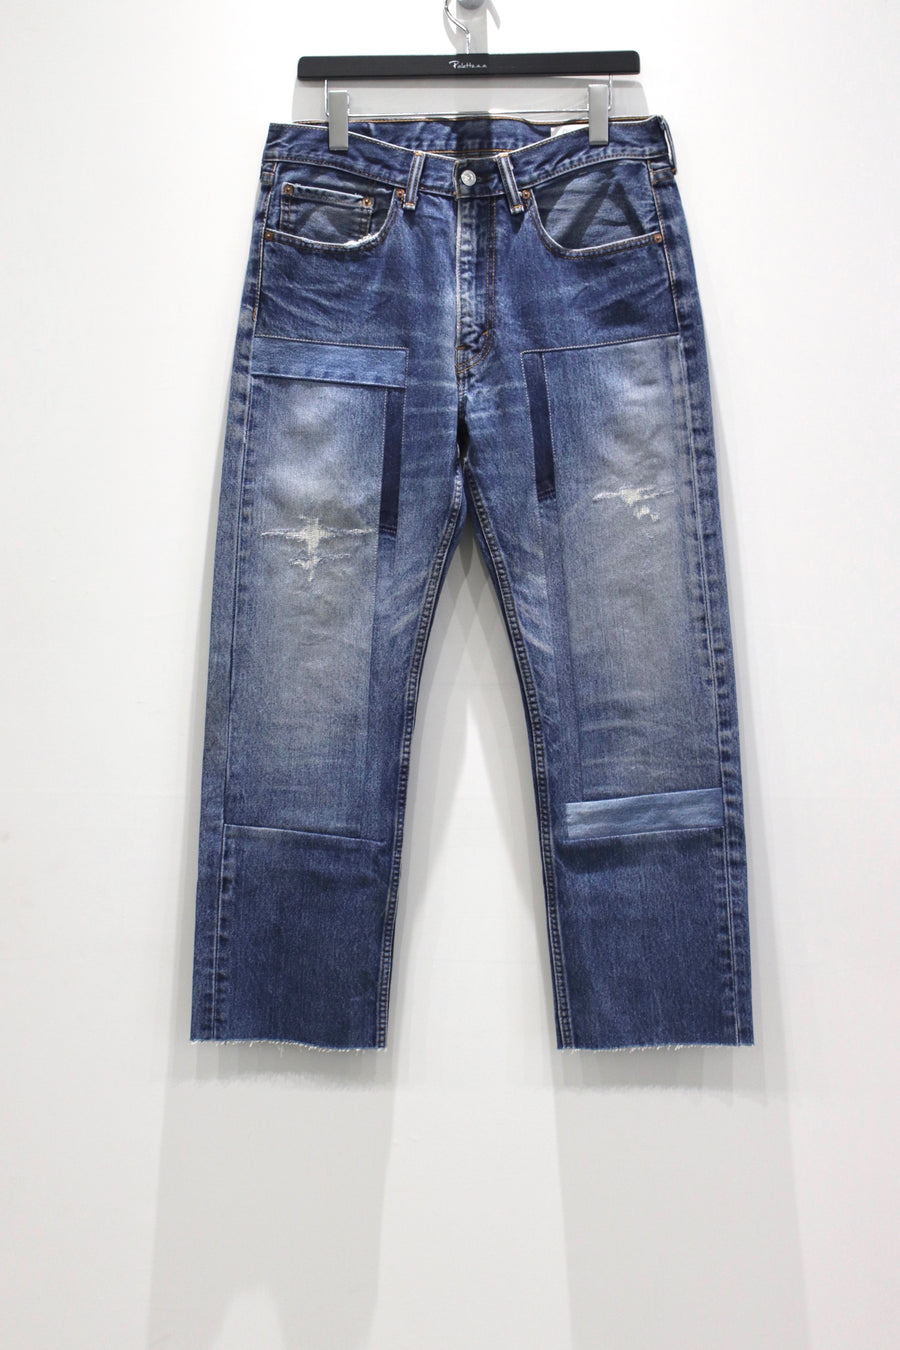 Children of the discordance  NY VINTAGE CUSTOMMADE PATCH DENIM C